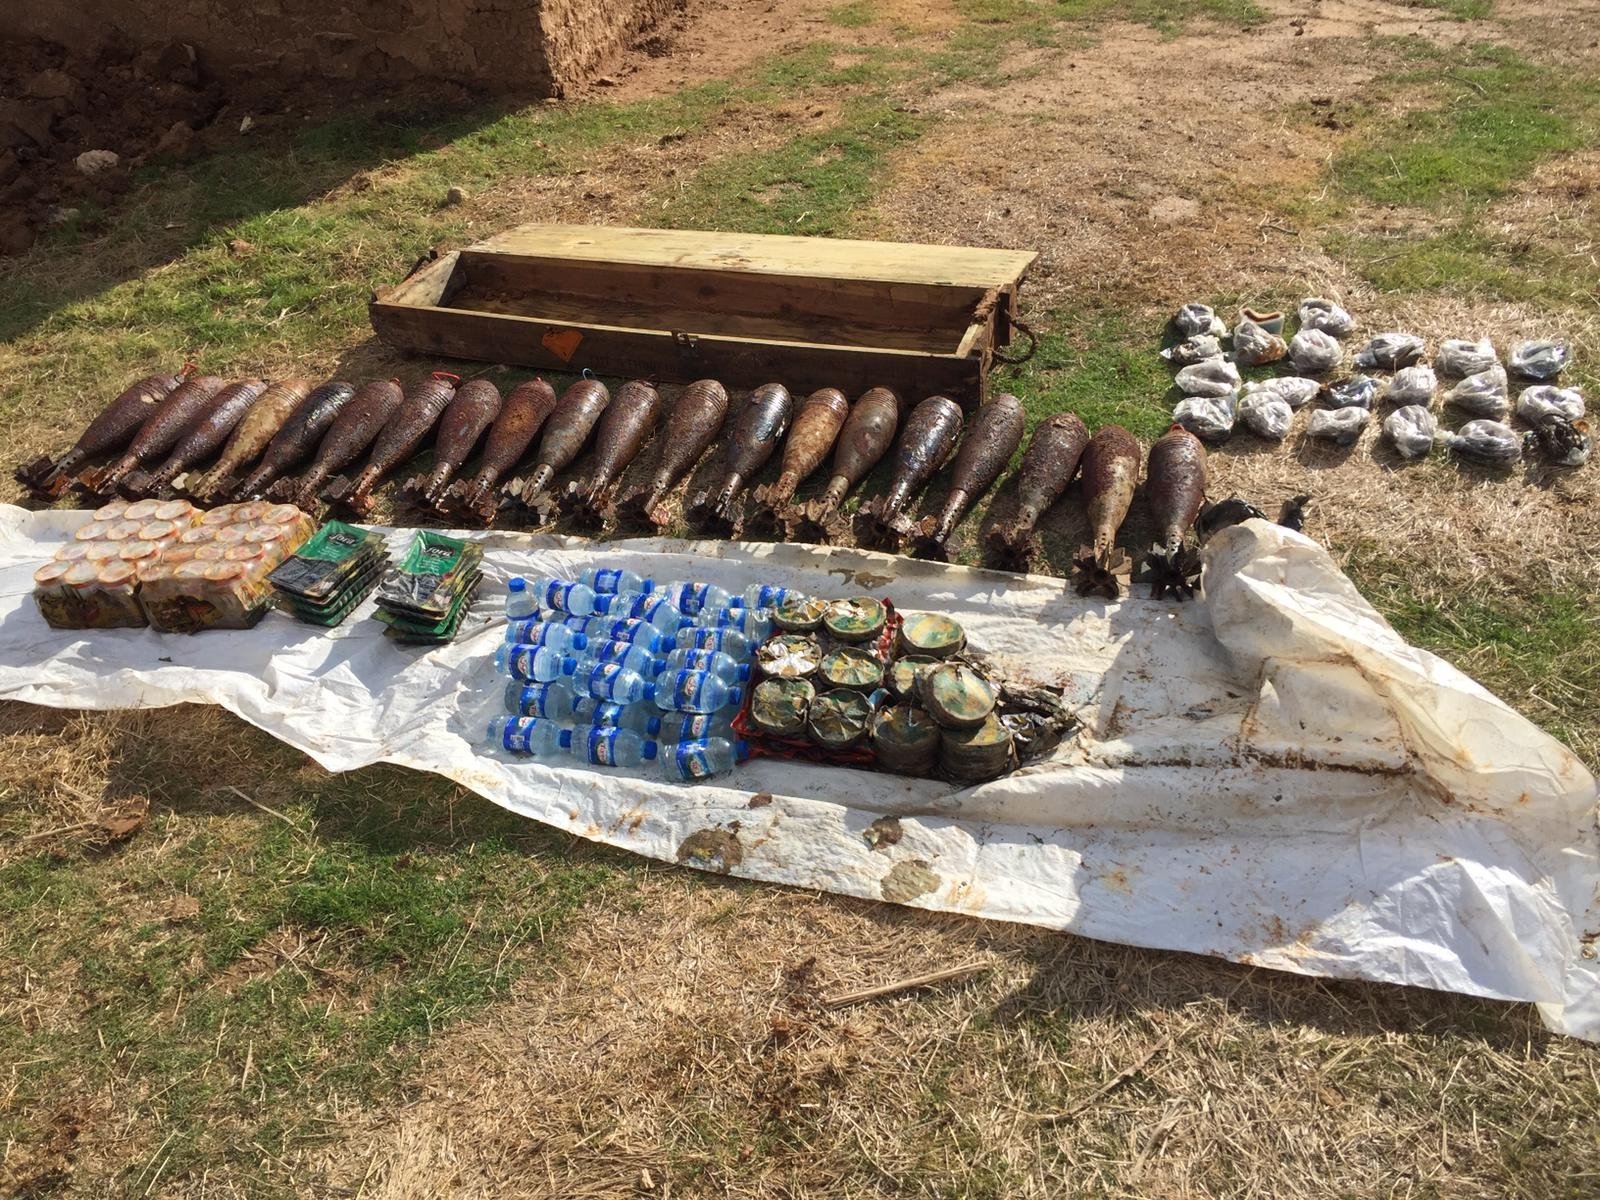 Some 262 kilograms (577 pounds) of explosives found by security forces in Tal Abyad, Syria, Jan. 18, 2021. (AA Photo)